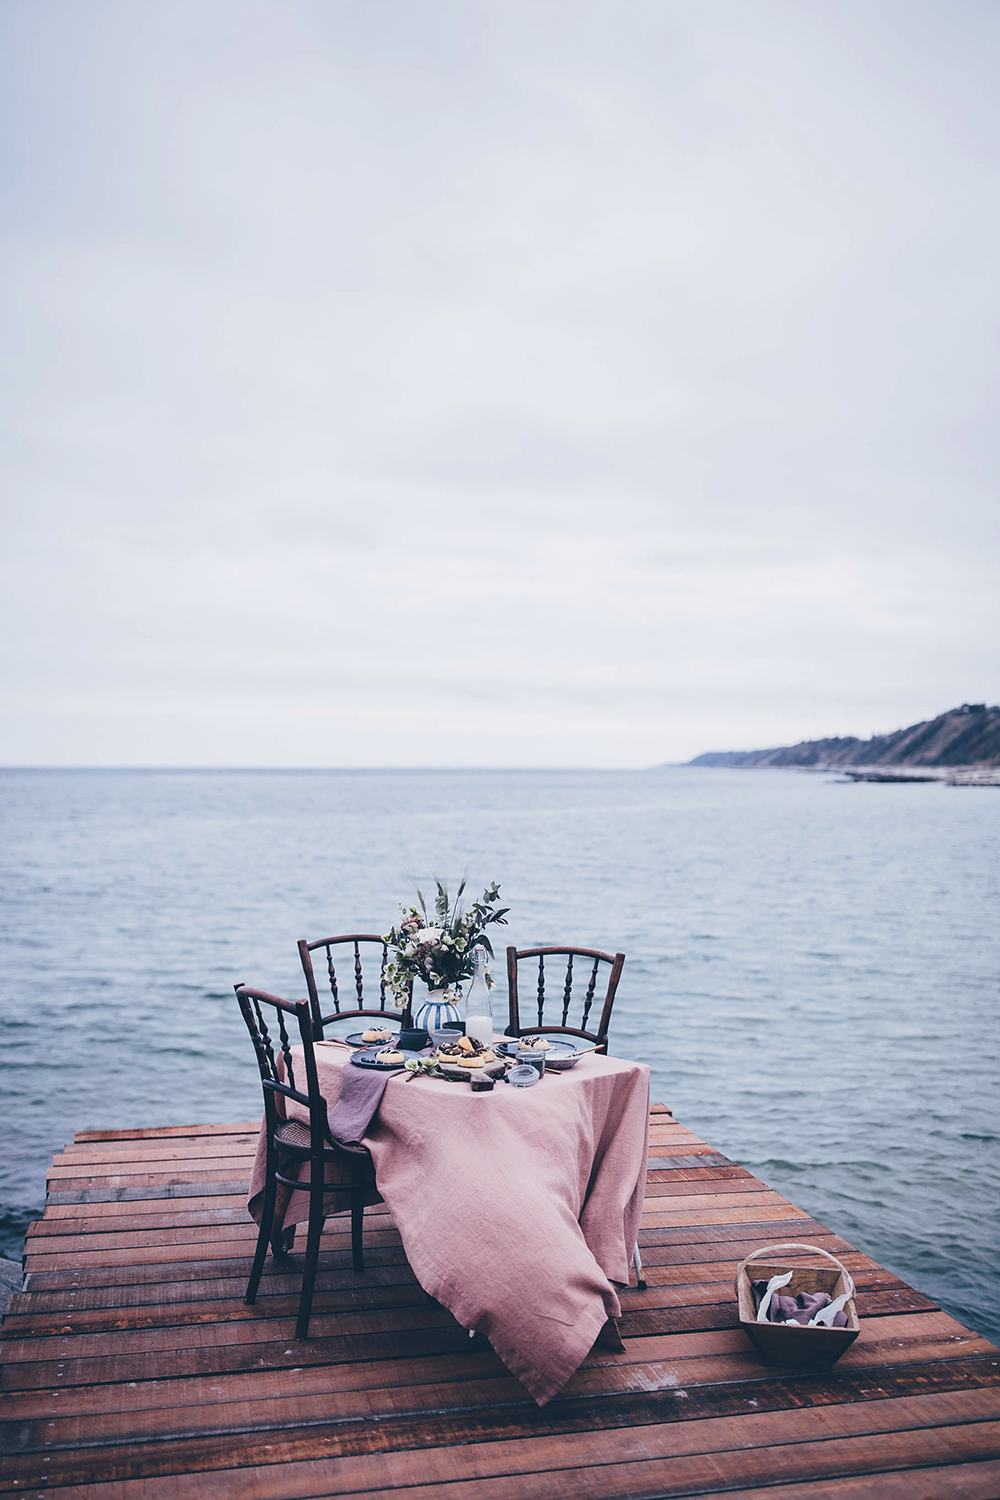 Gluten-free Poppy Seed Buns & A Magical Table Setting at the Sea